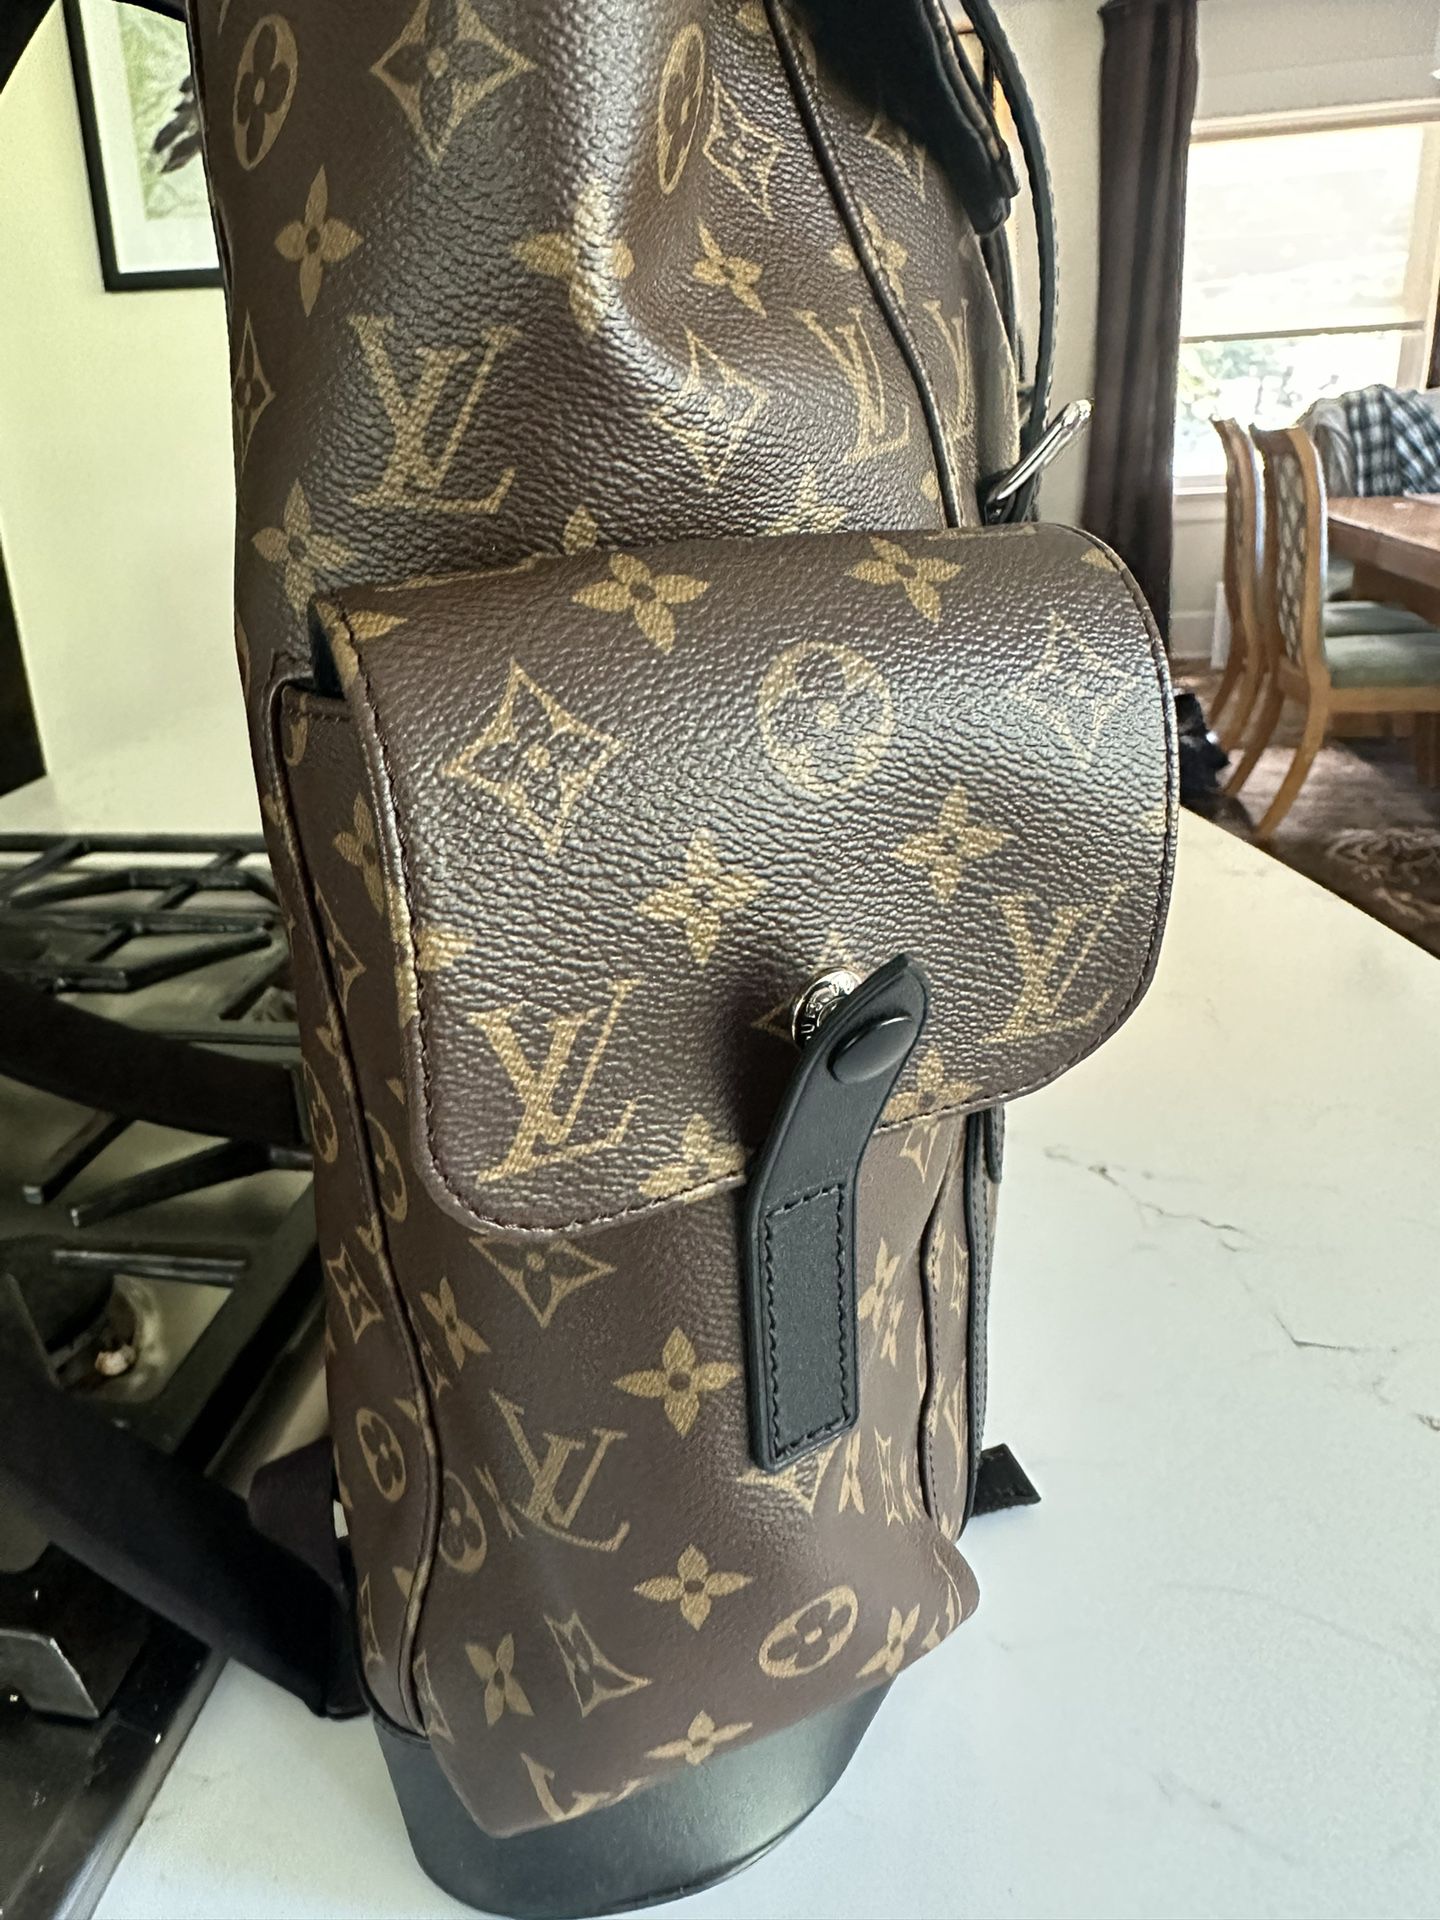 Louis Vuitton Backpack for Sale in Seattle, WA - OfferUp